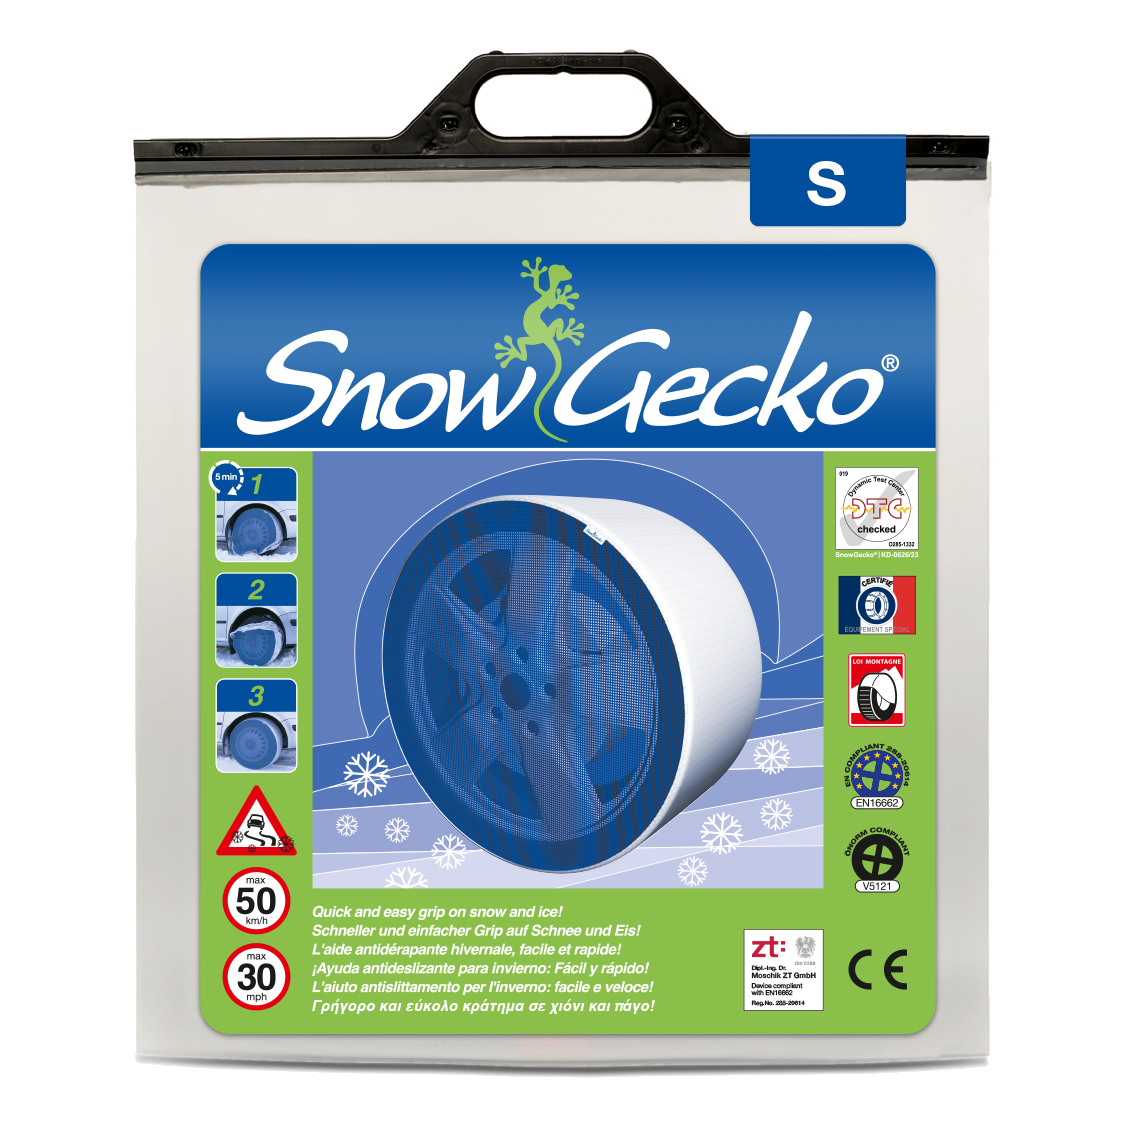 SnowGecko S product packaging front side